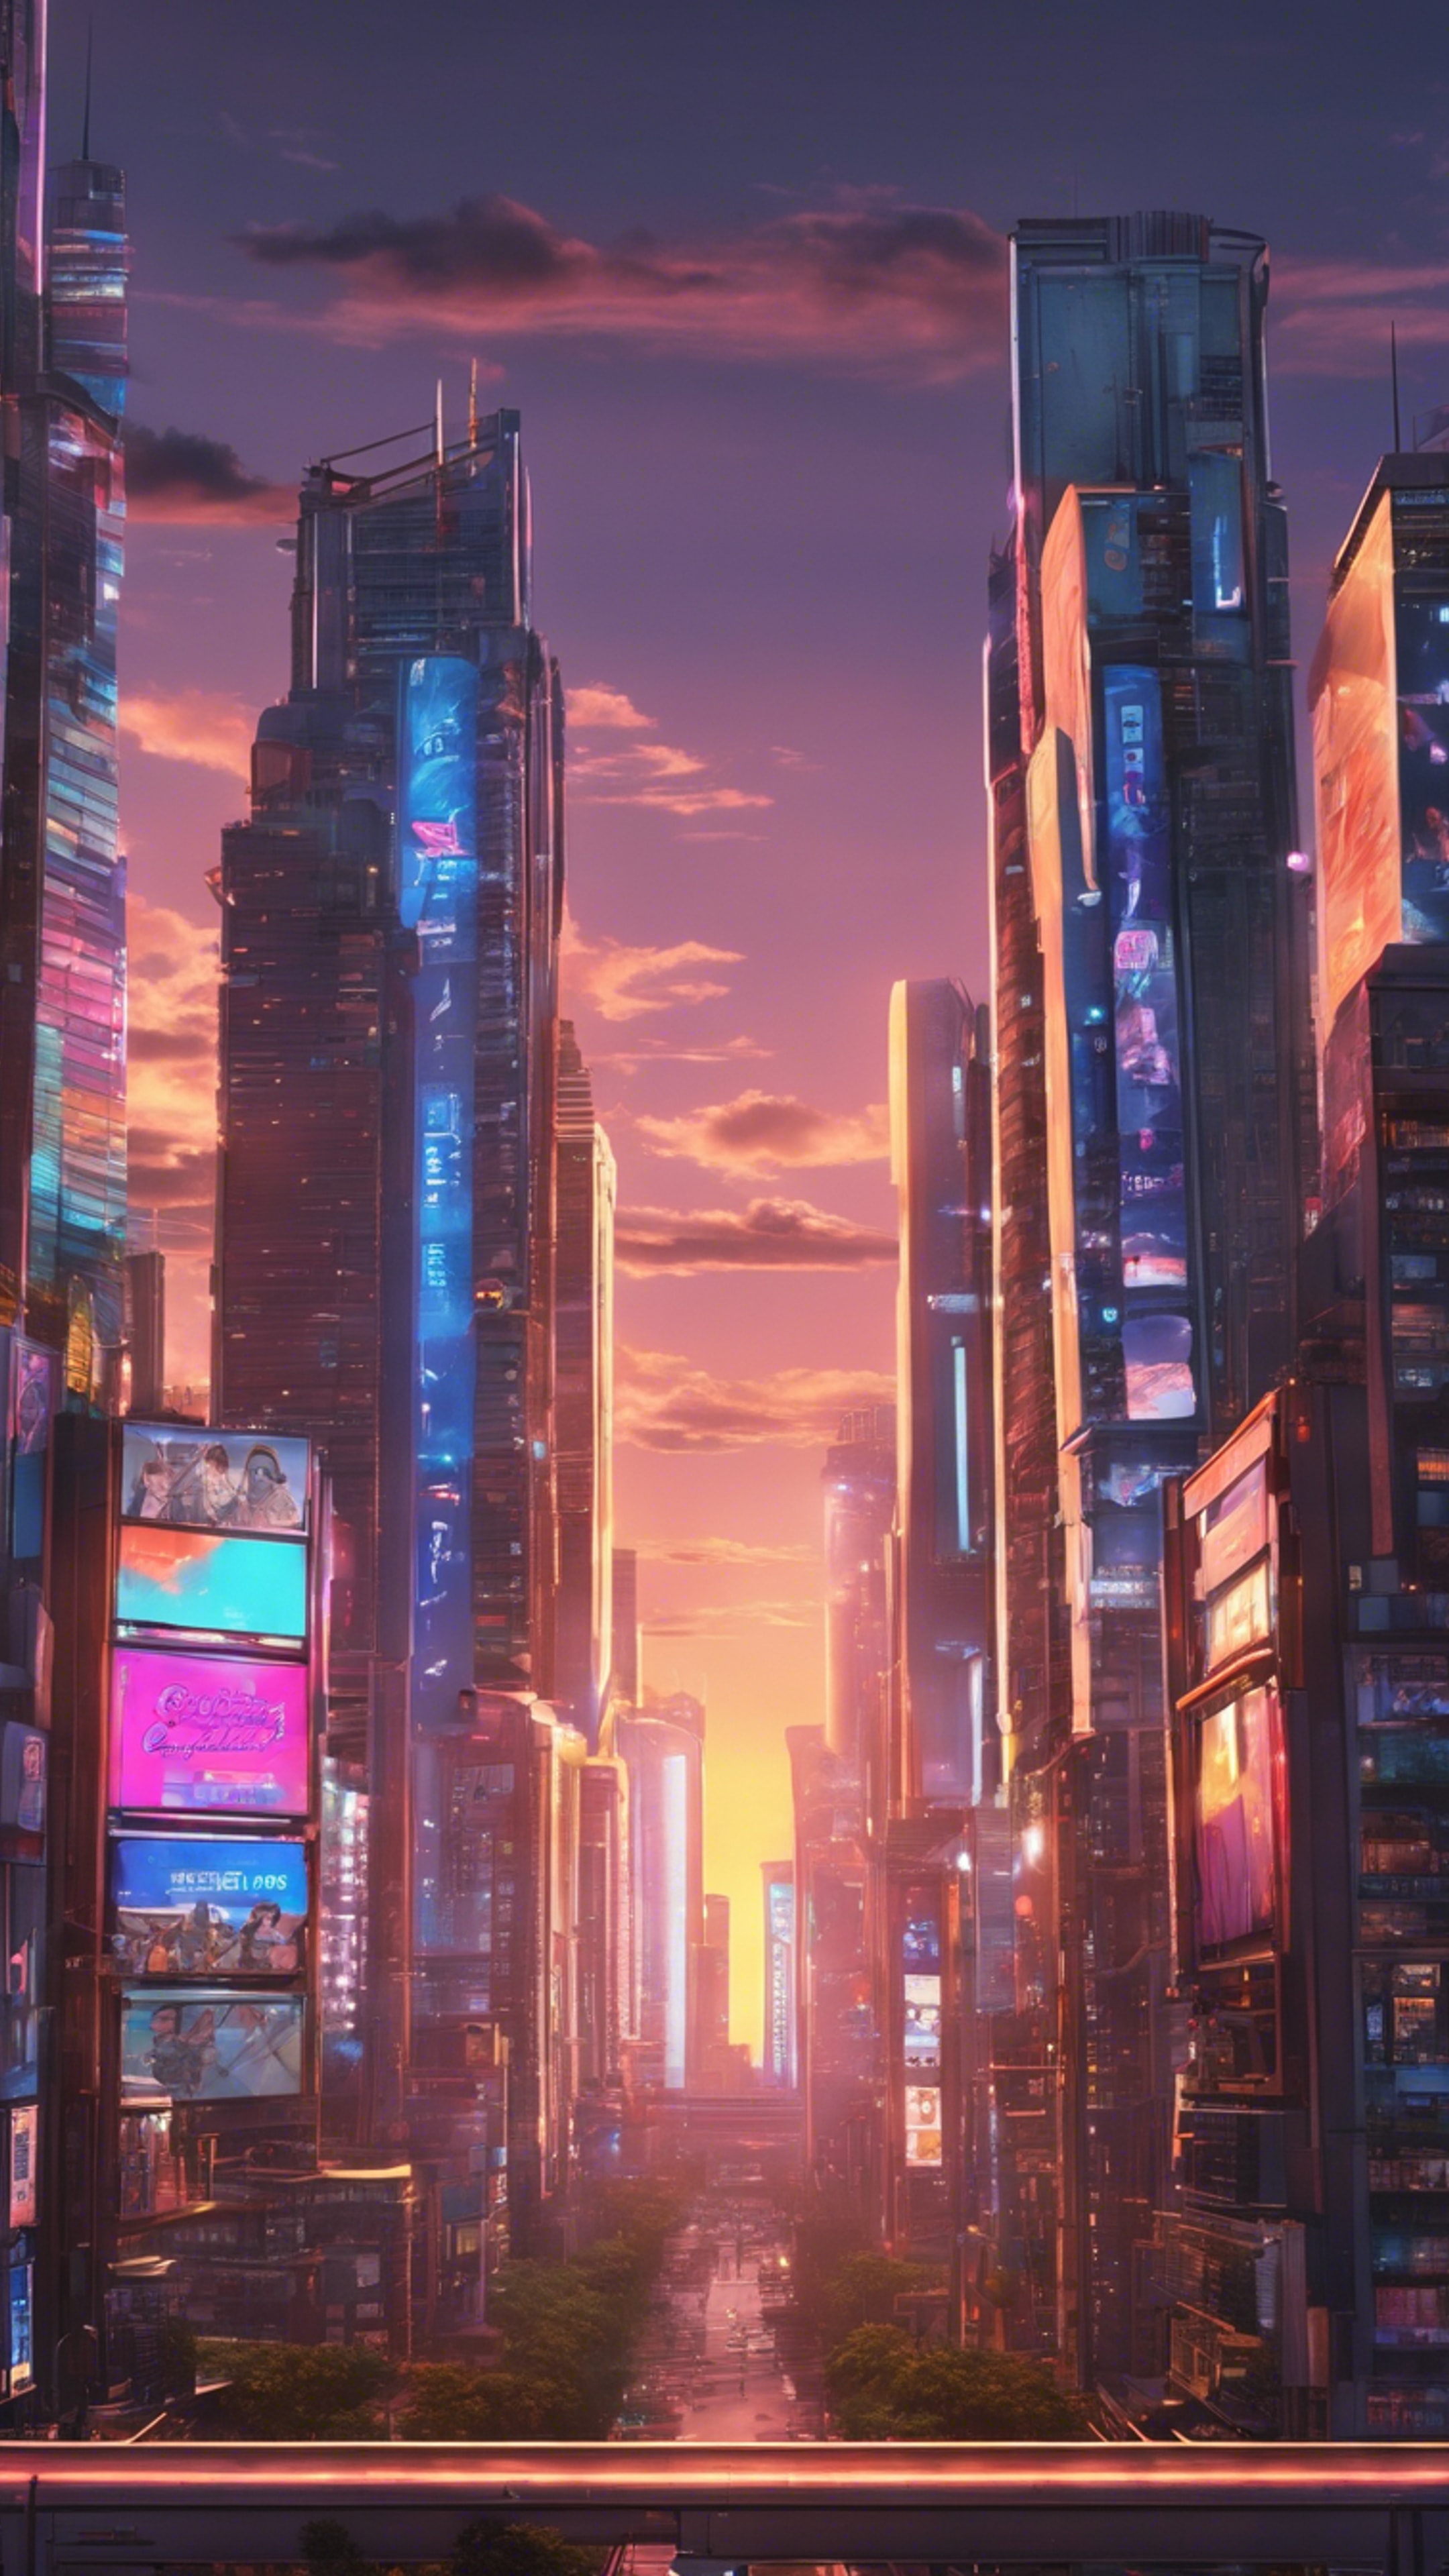 A cool anime-themed cityscape at sunset with towering skyscrapers and glowing neon billboards. Валлпапер[63ed83801d984cce89ed]